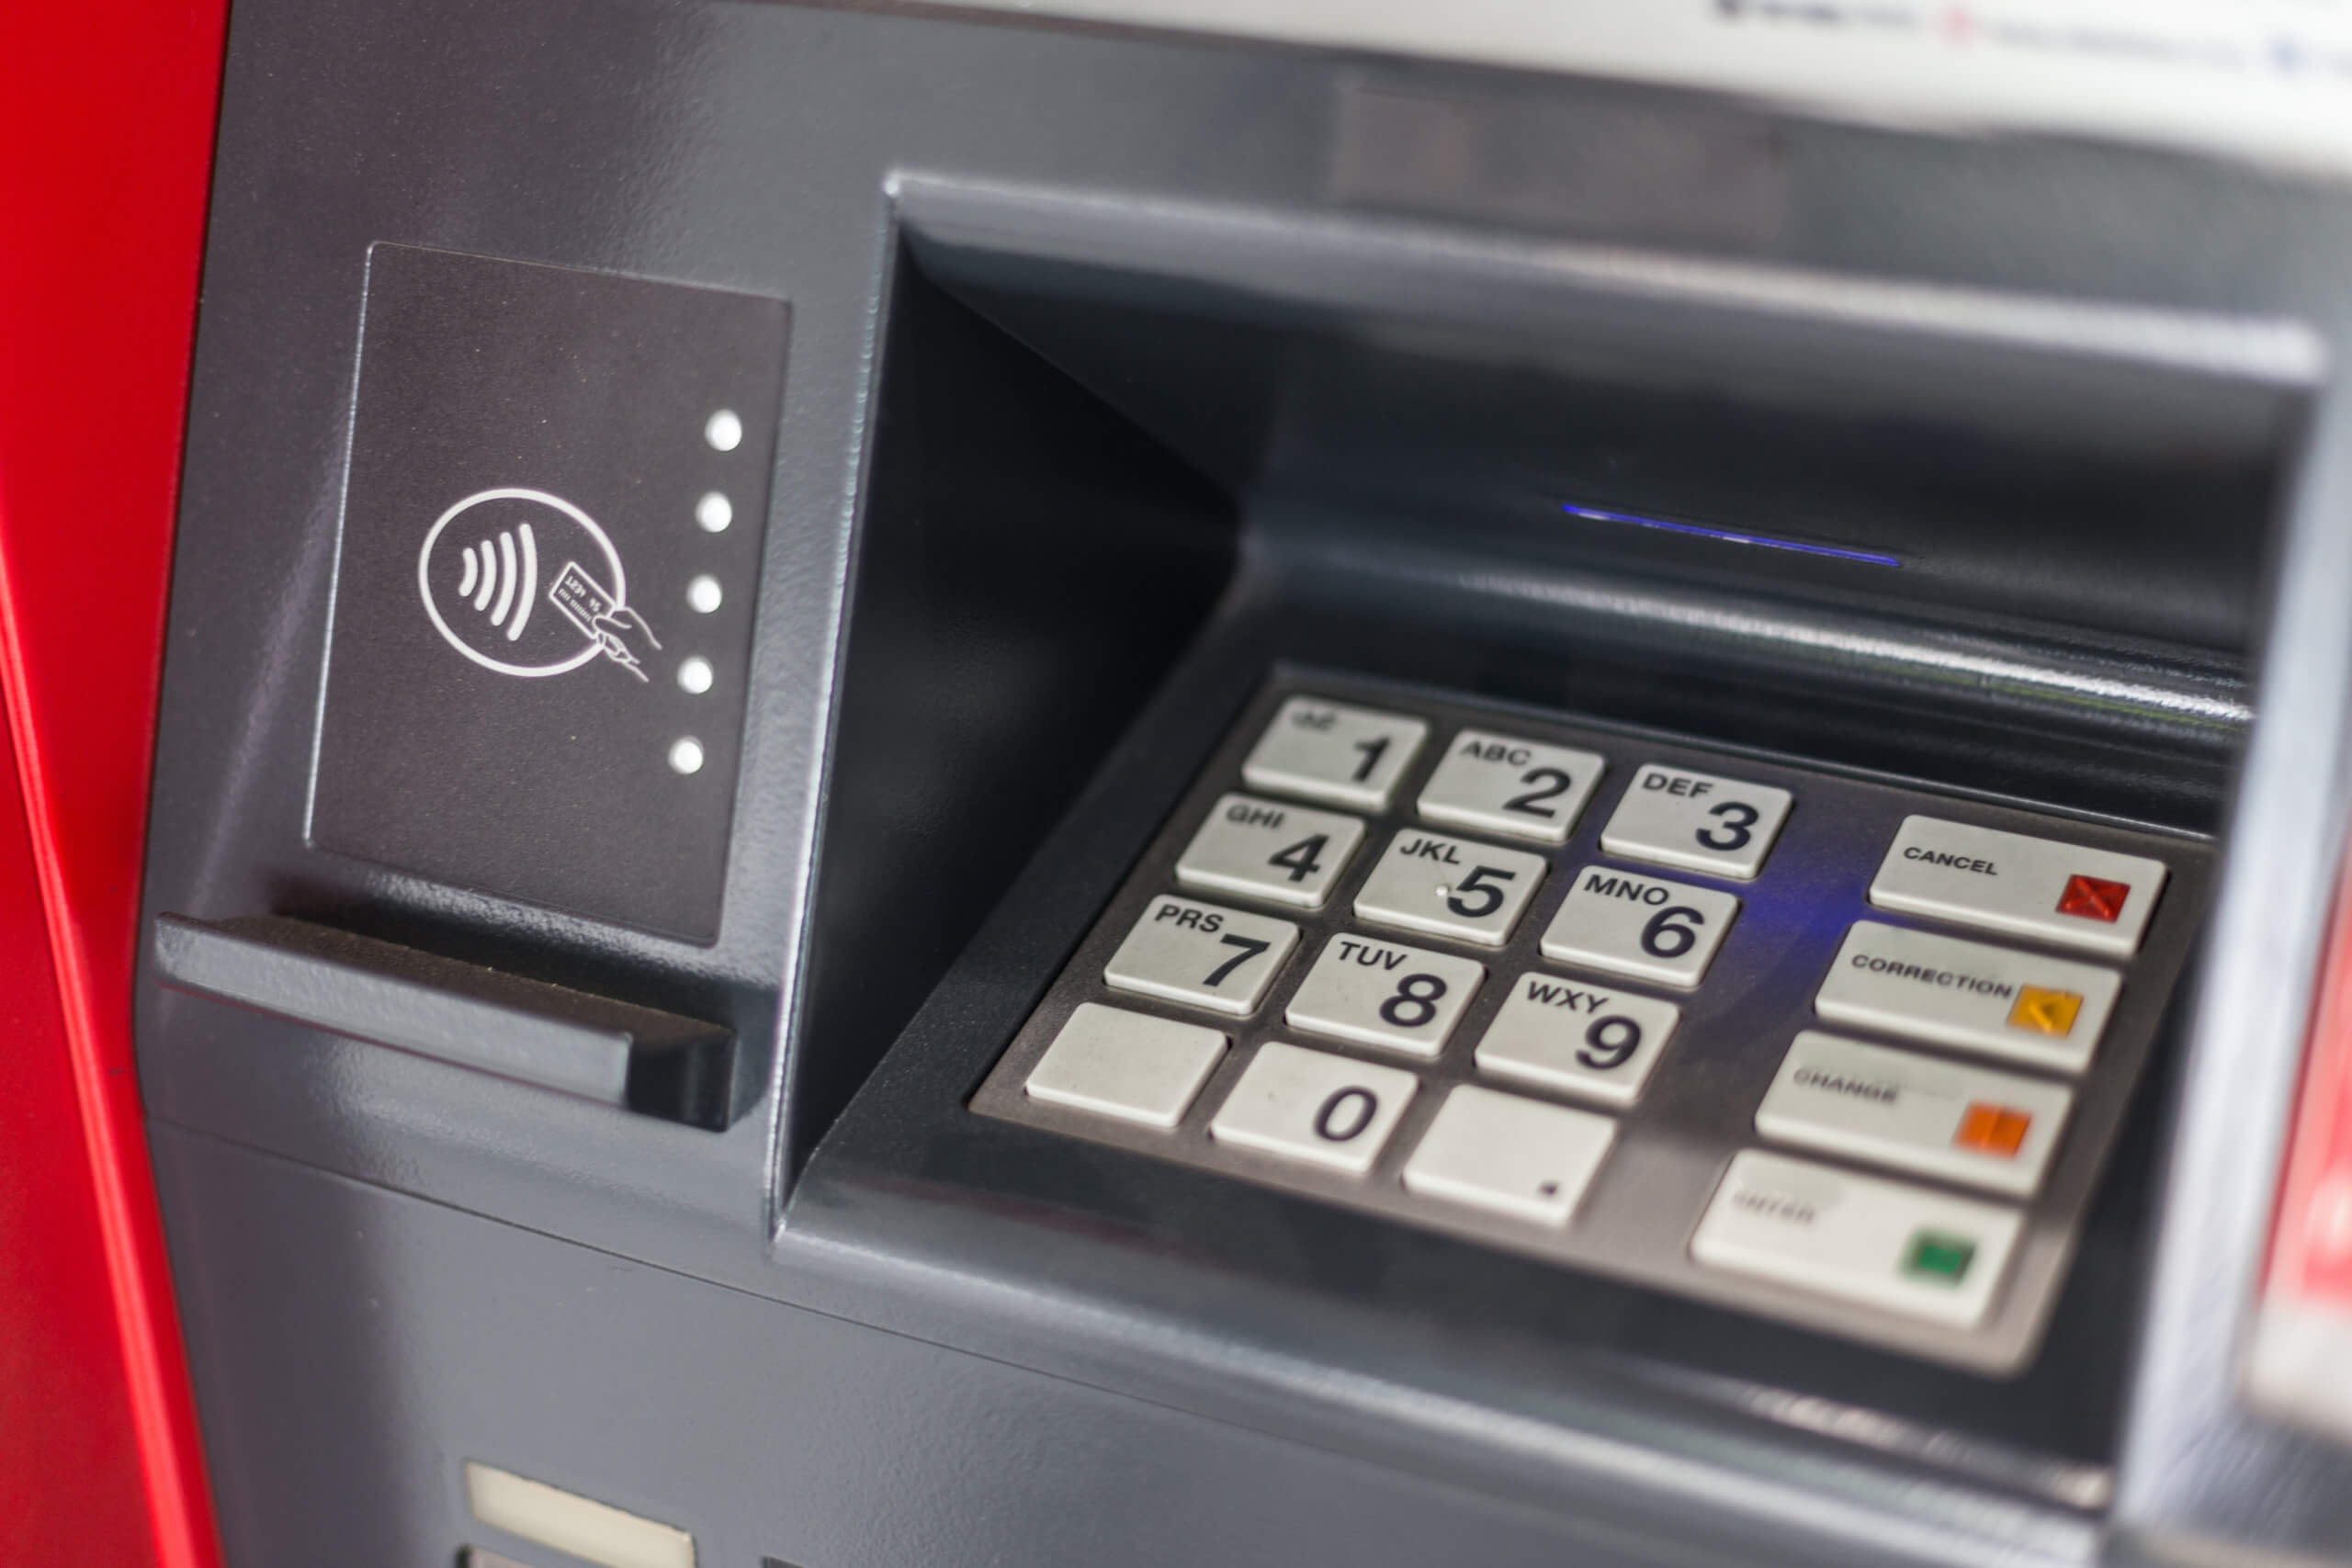 How Do You Protect Yourself from Credit Card Skimmers?